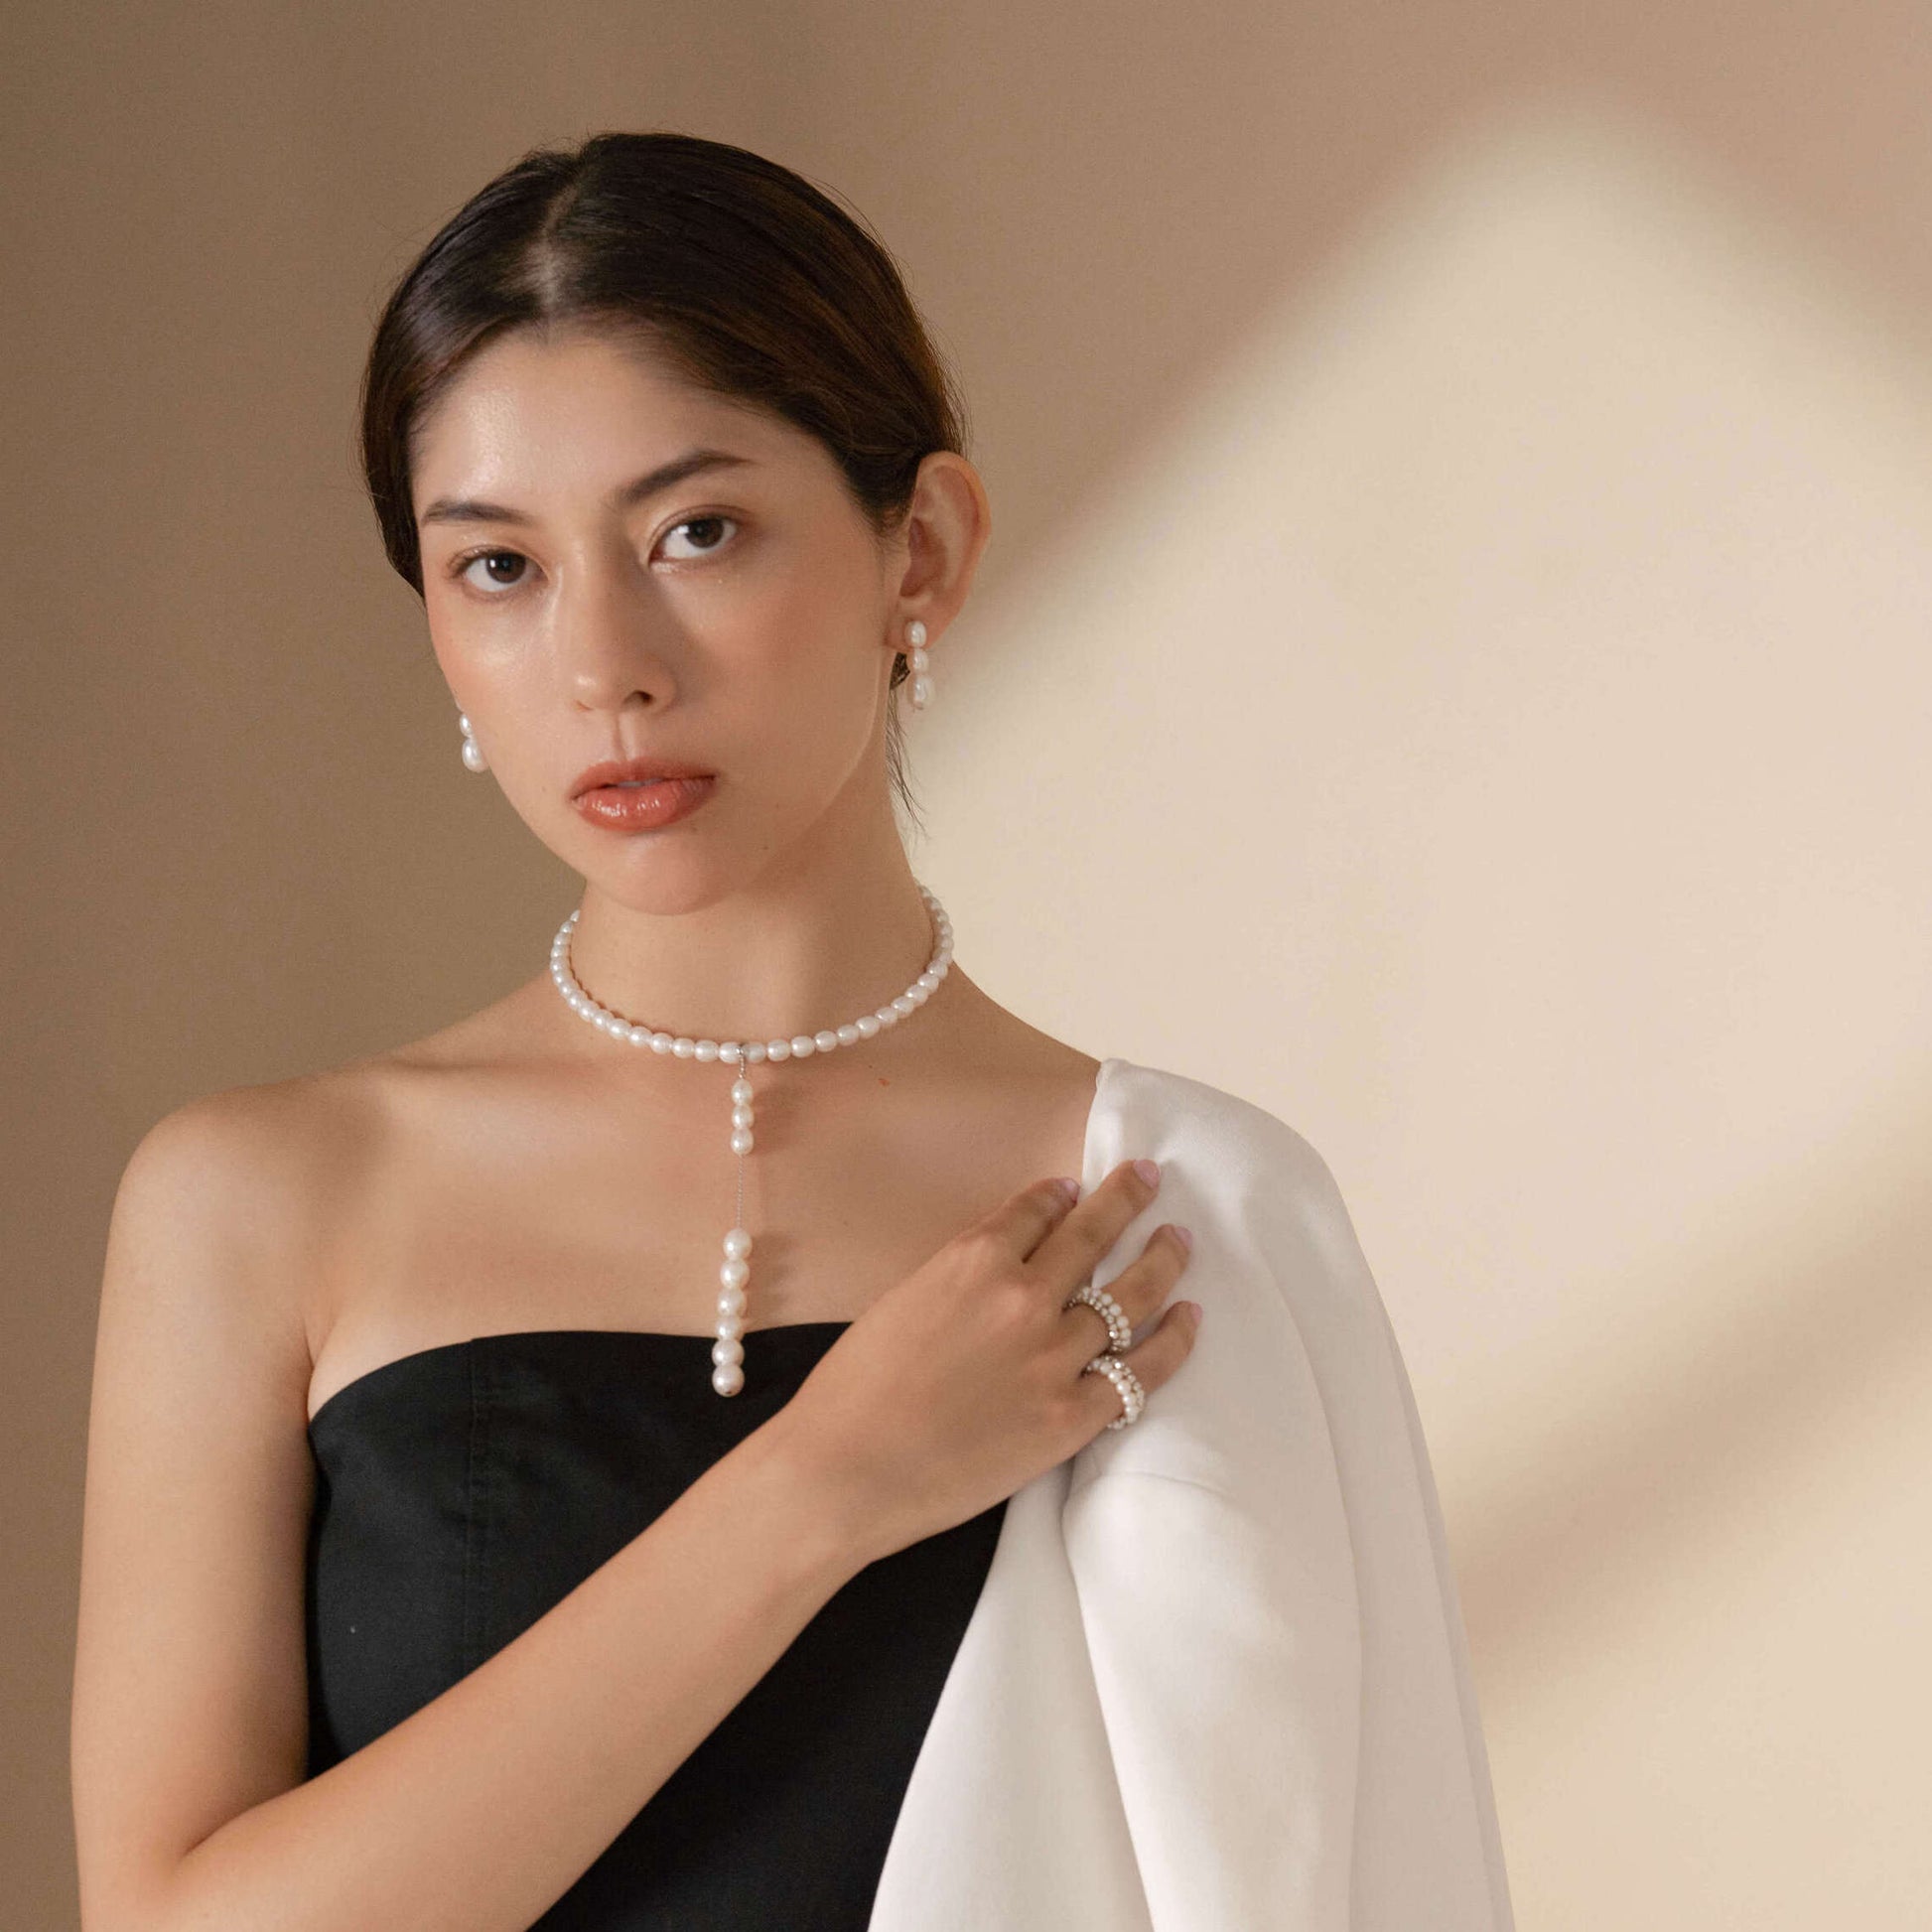 Add a touch of sophistication with a woman wearing a pearl necklace and earrings. Classic chic!